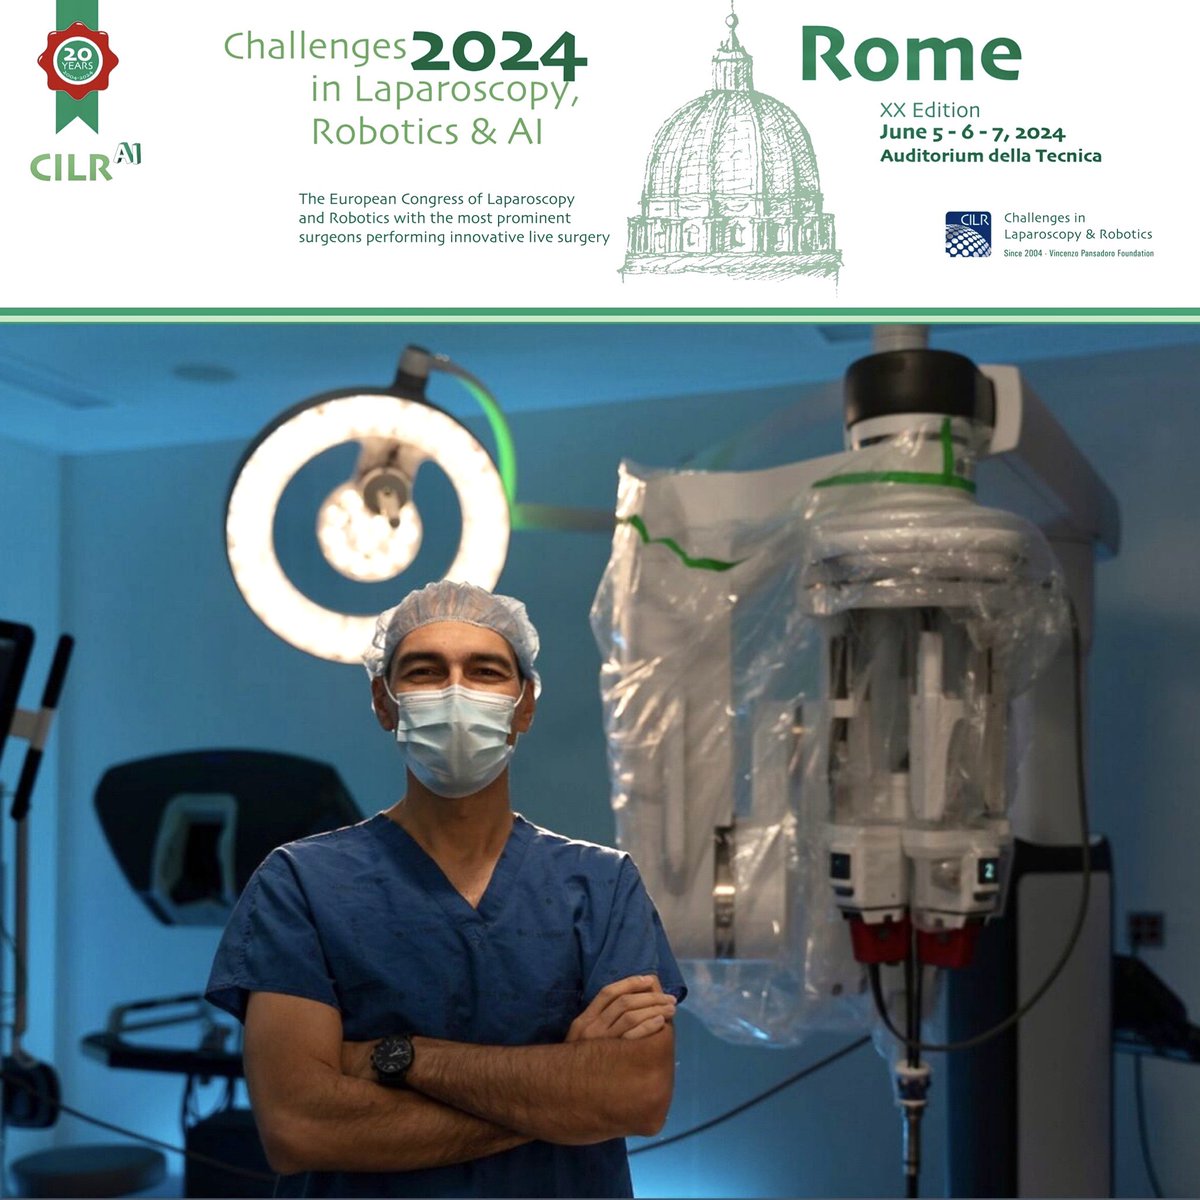 What do you get when you combine expertise with innovation? A #SinglePort RAPN by @SimoneCrivella2 from @UICUrol moderated by @Dr_JihadKaouk and Aldo Brassetti, at our upcoming congress! Do not miss this unmissable edition of #CILR24